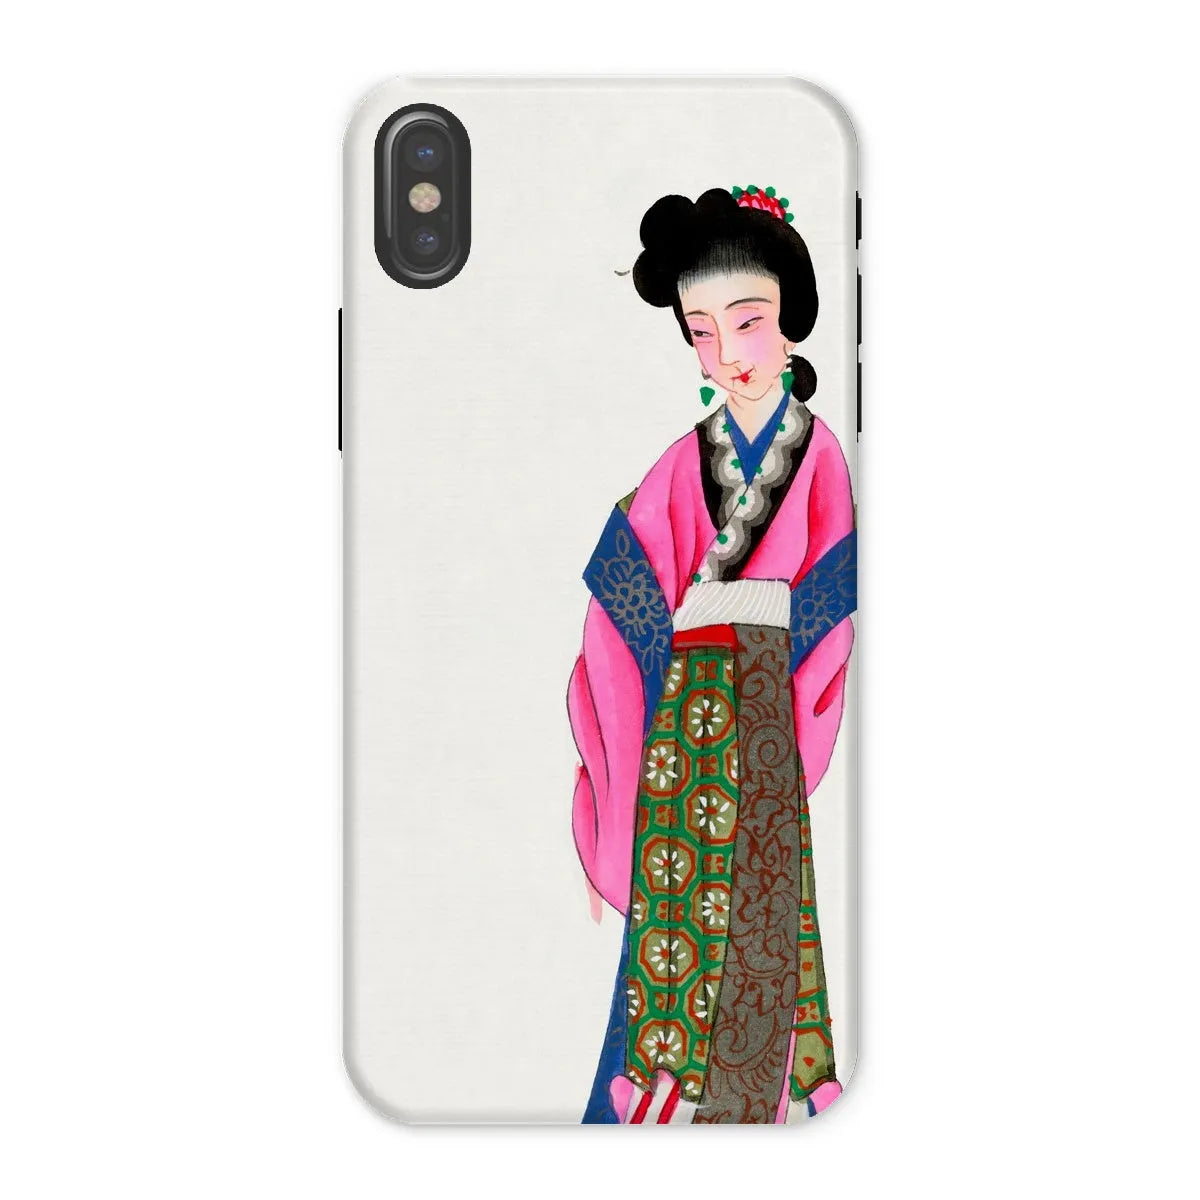 Noblewoman - Chinese Aesthetic Manchu Art Phone Case - Iphone x / Matte - Mobile Phone Cases - Aesthetic Art